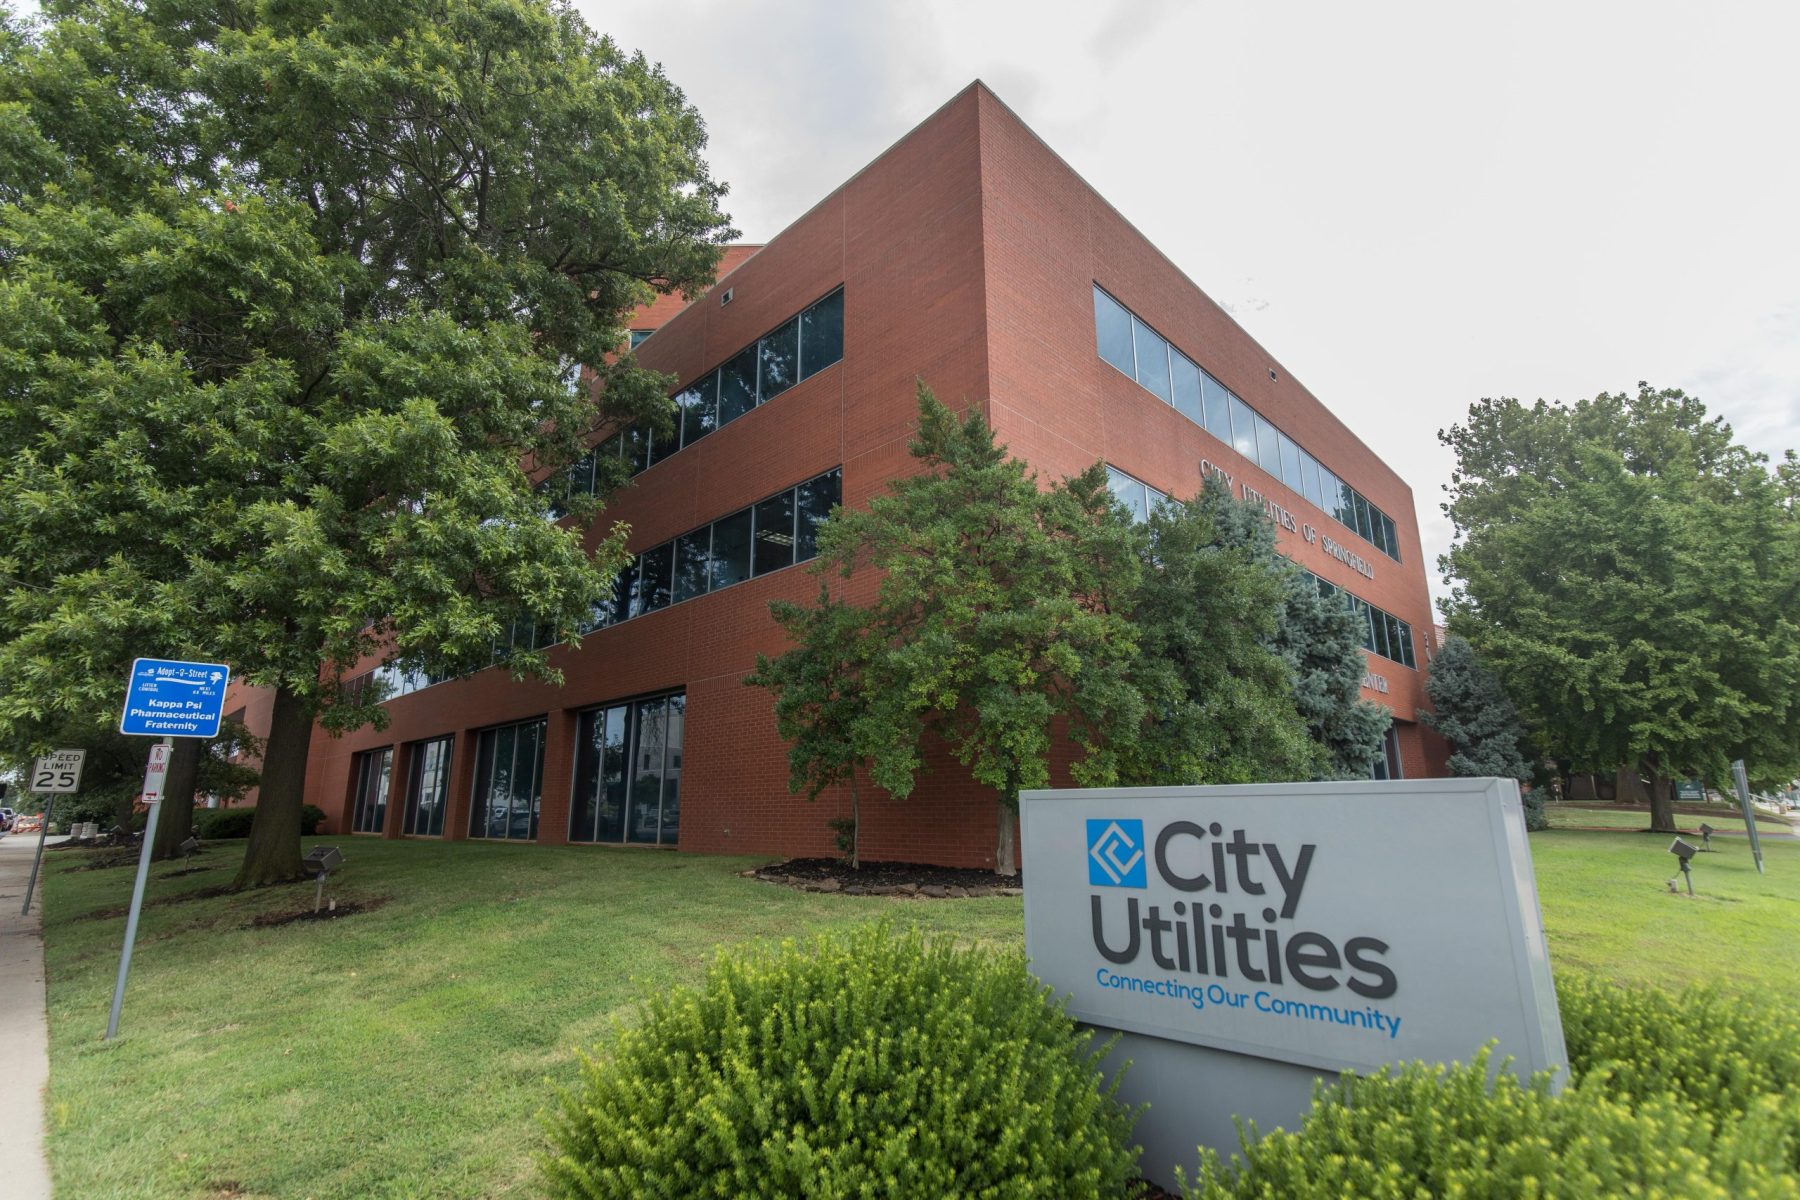 City Utilities with building and trees in the background on a cloudy spring day.